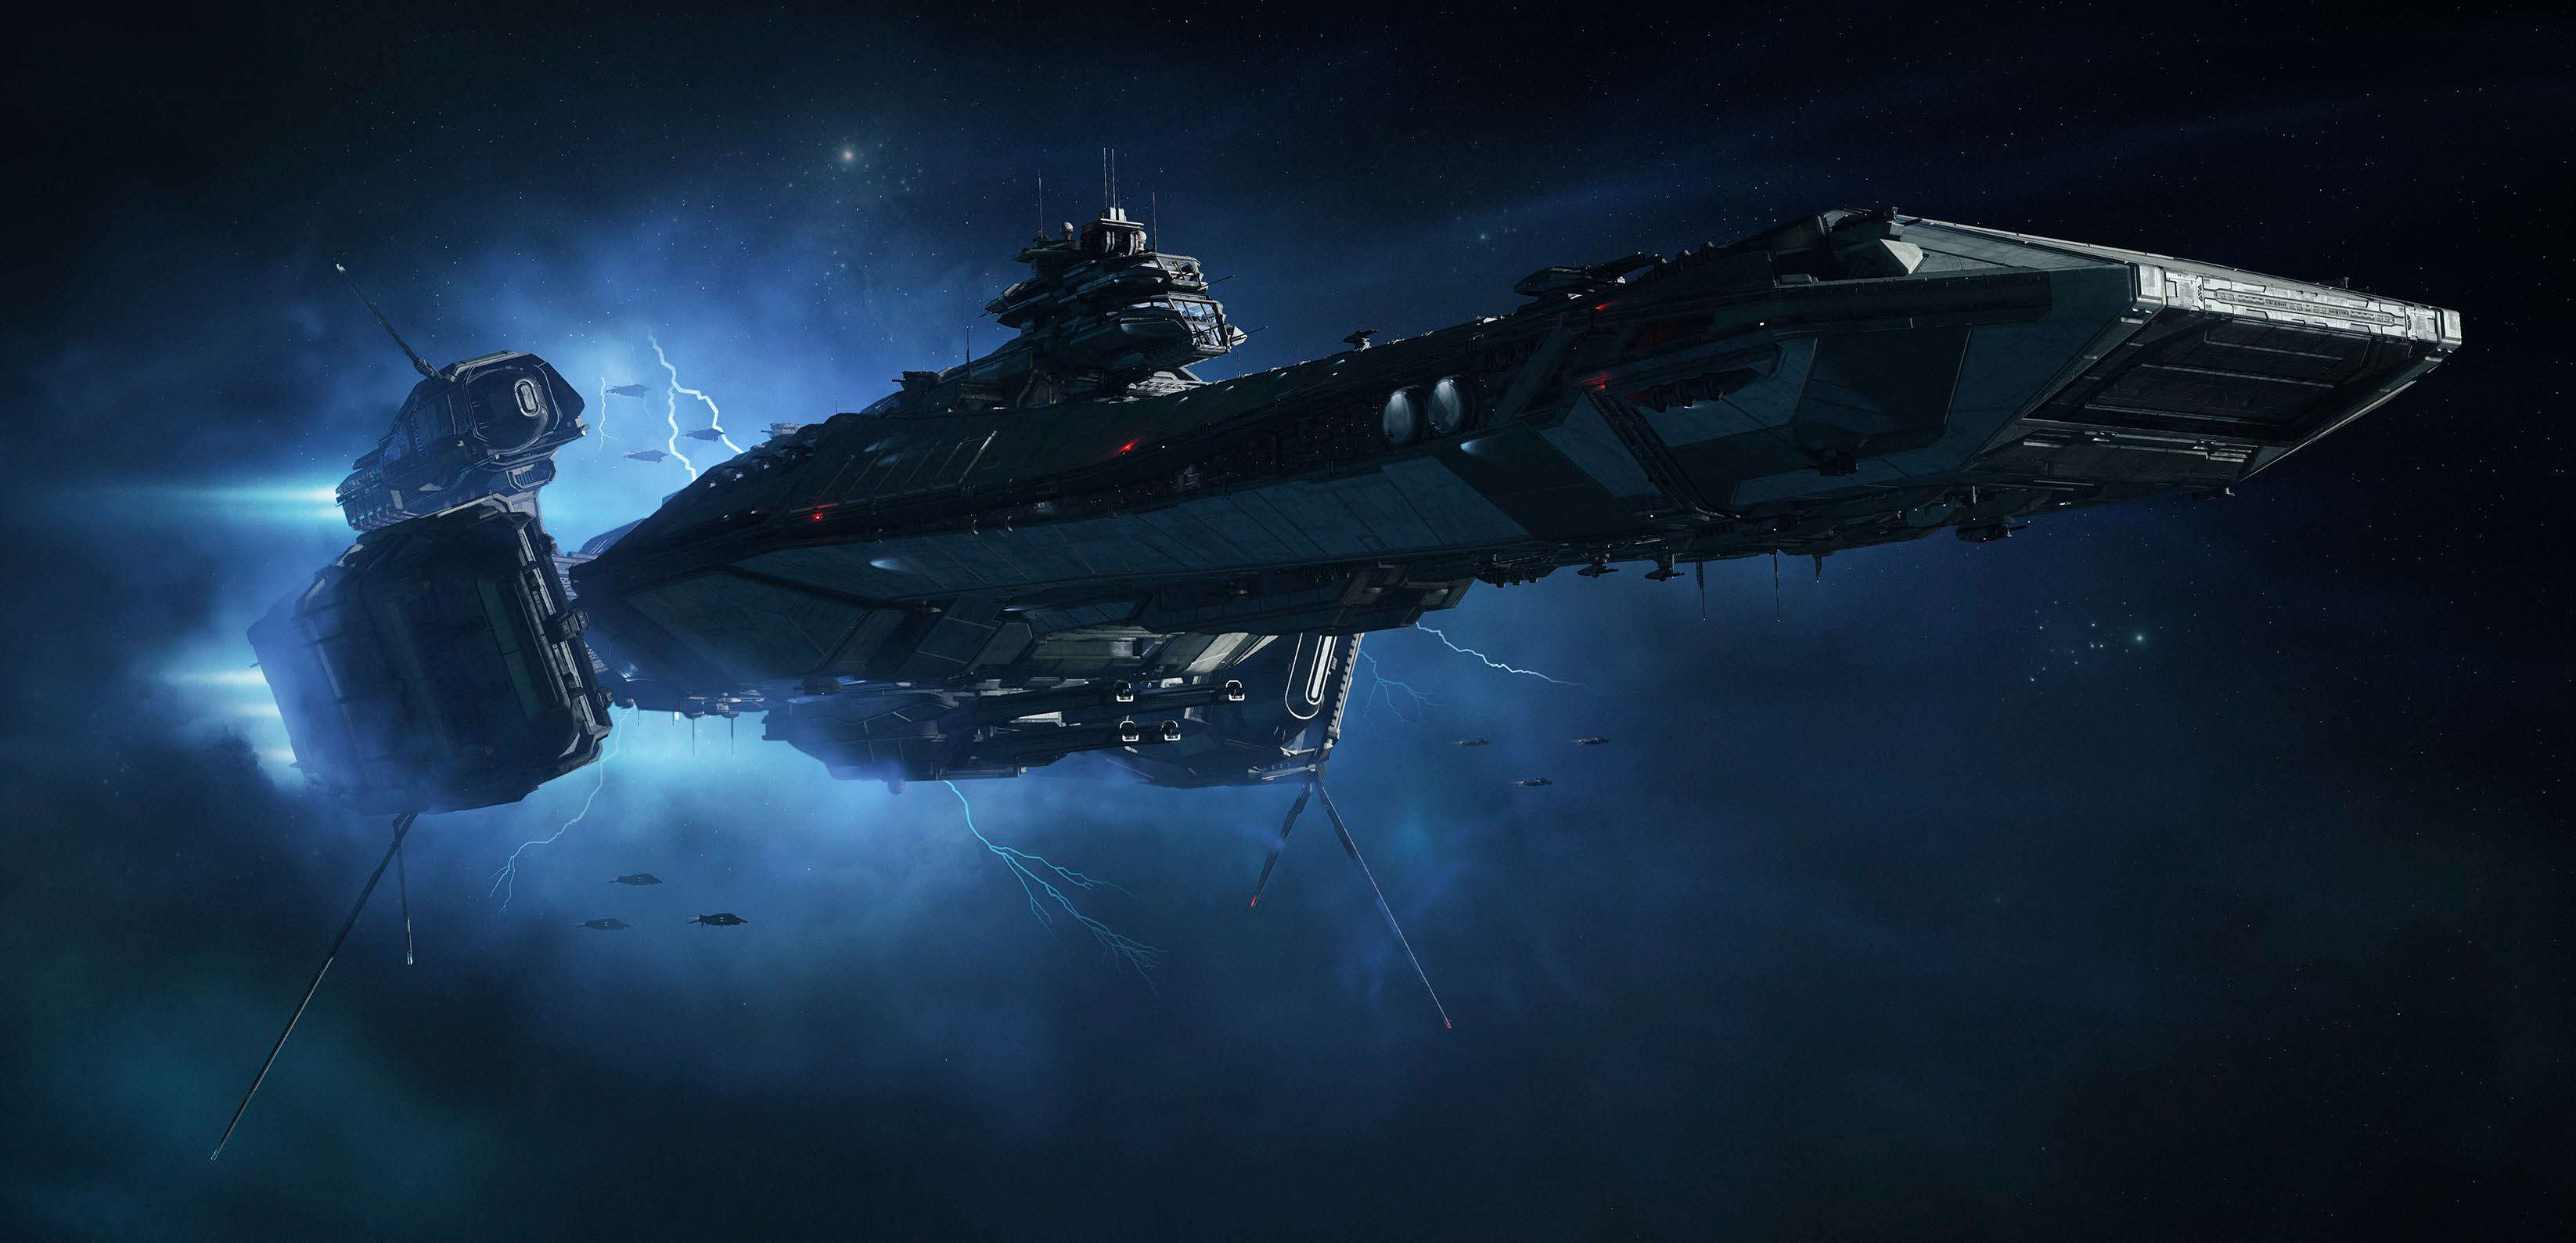 It seems like the Spirit series will also have traversing turrets like the  Scorpius. : r/starcitizen